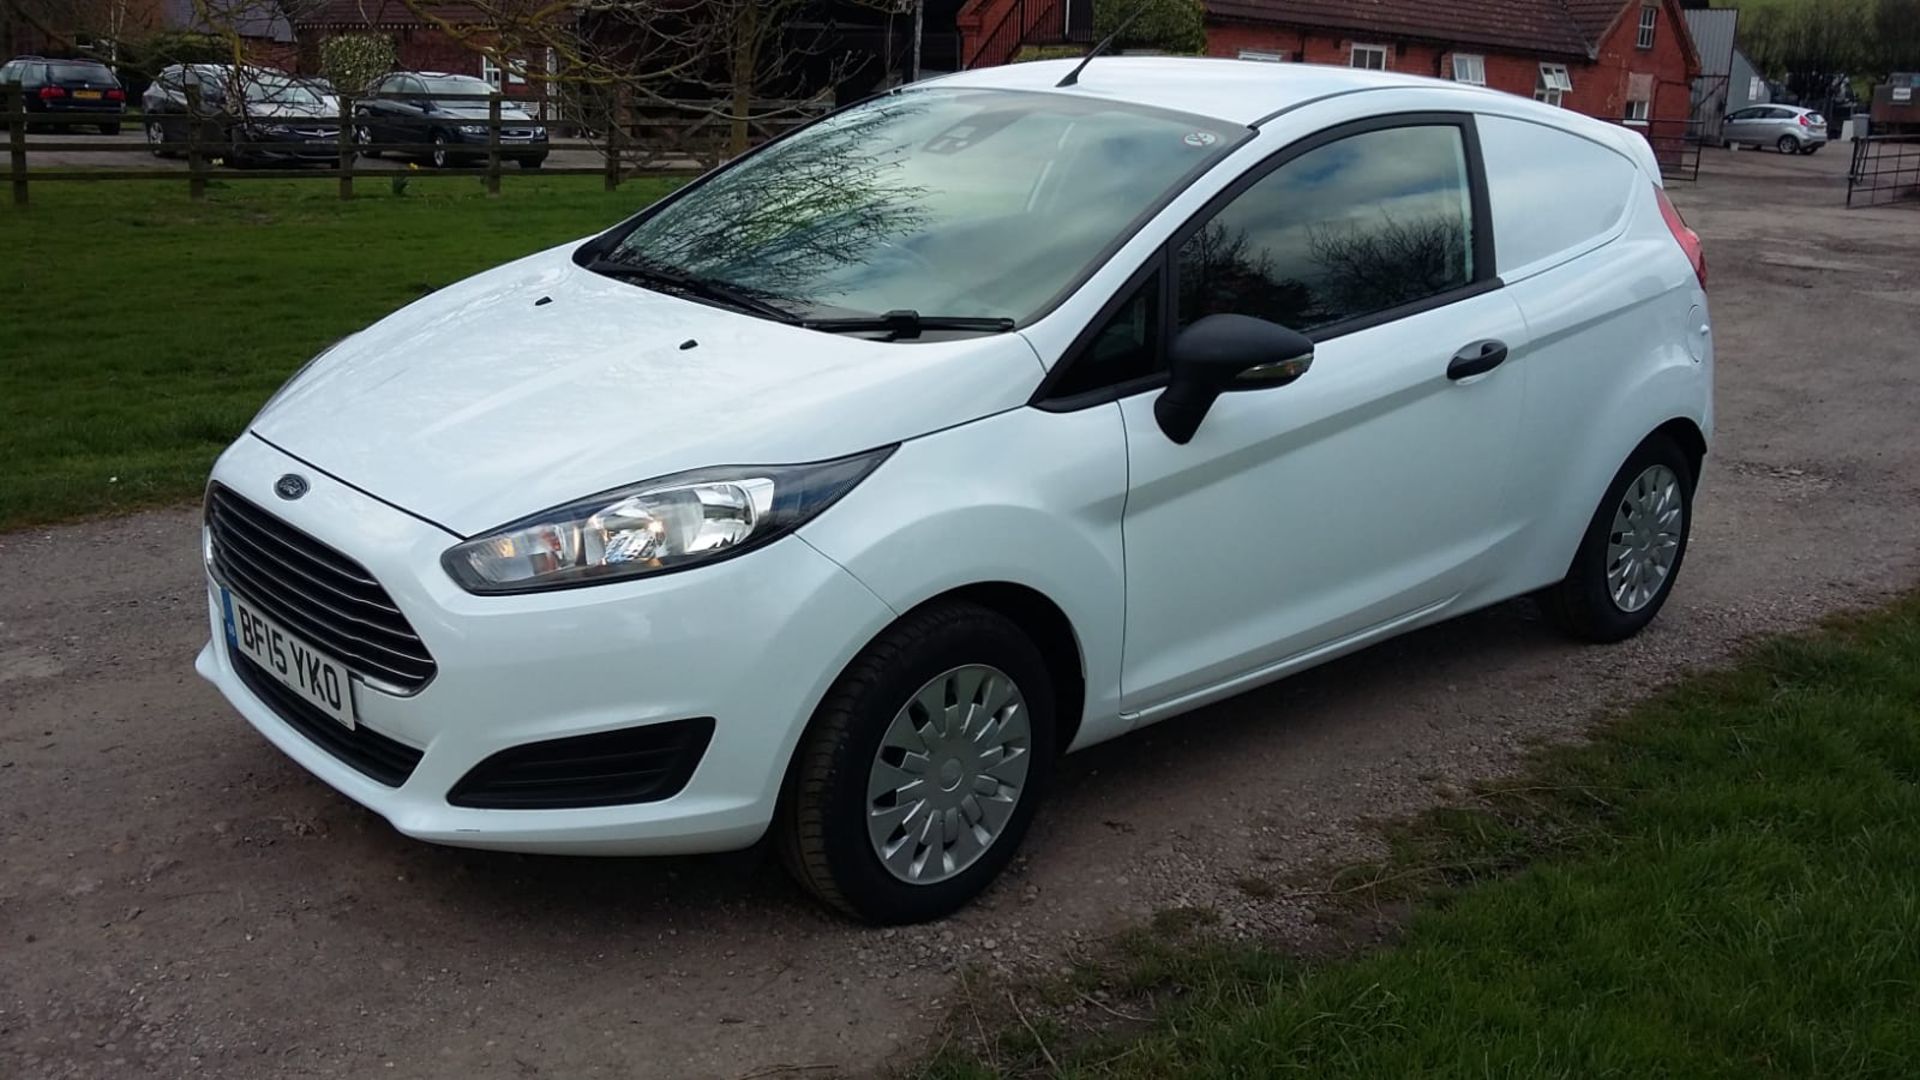 2015/15 REG FORD FIESTA ECONETIC TECH TDCI 1.6 CAR DERIVED VAN, SHOWING 0 FORMER KEEPERS *NO VAT* - Image 2 of 7